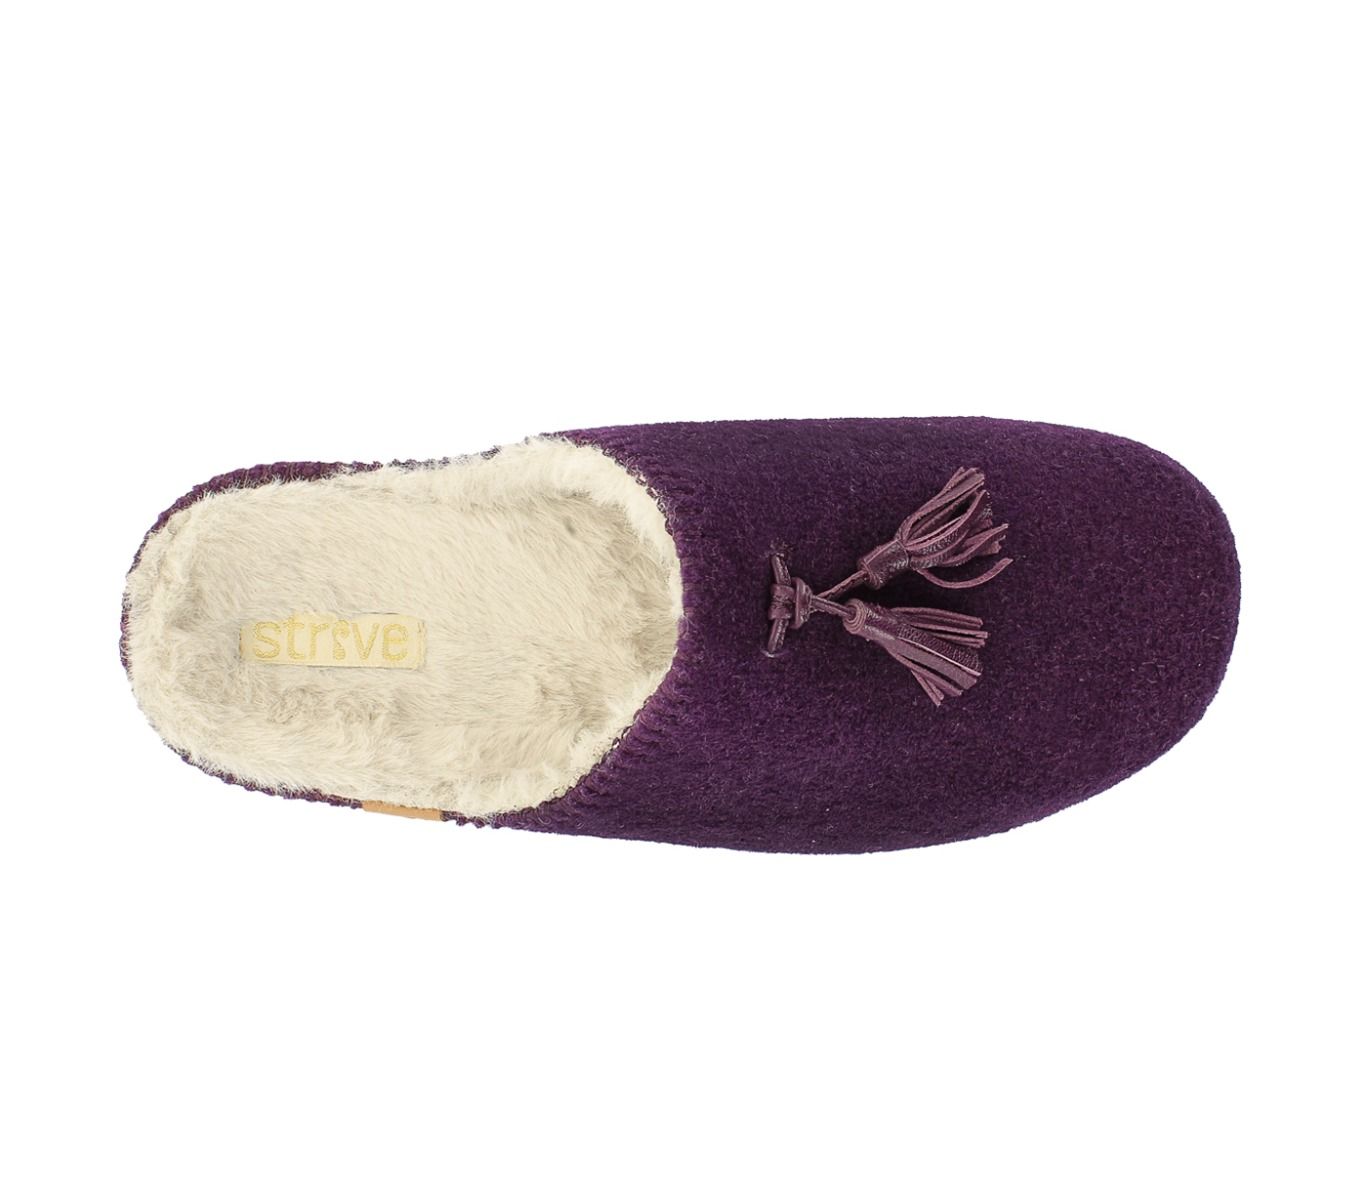 Strive Lille Ladies Purple Textile Arch Support Slippers